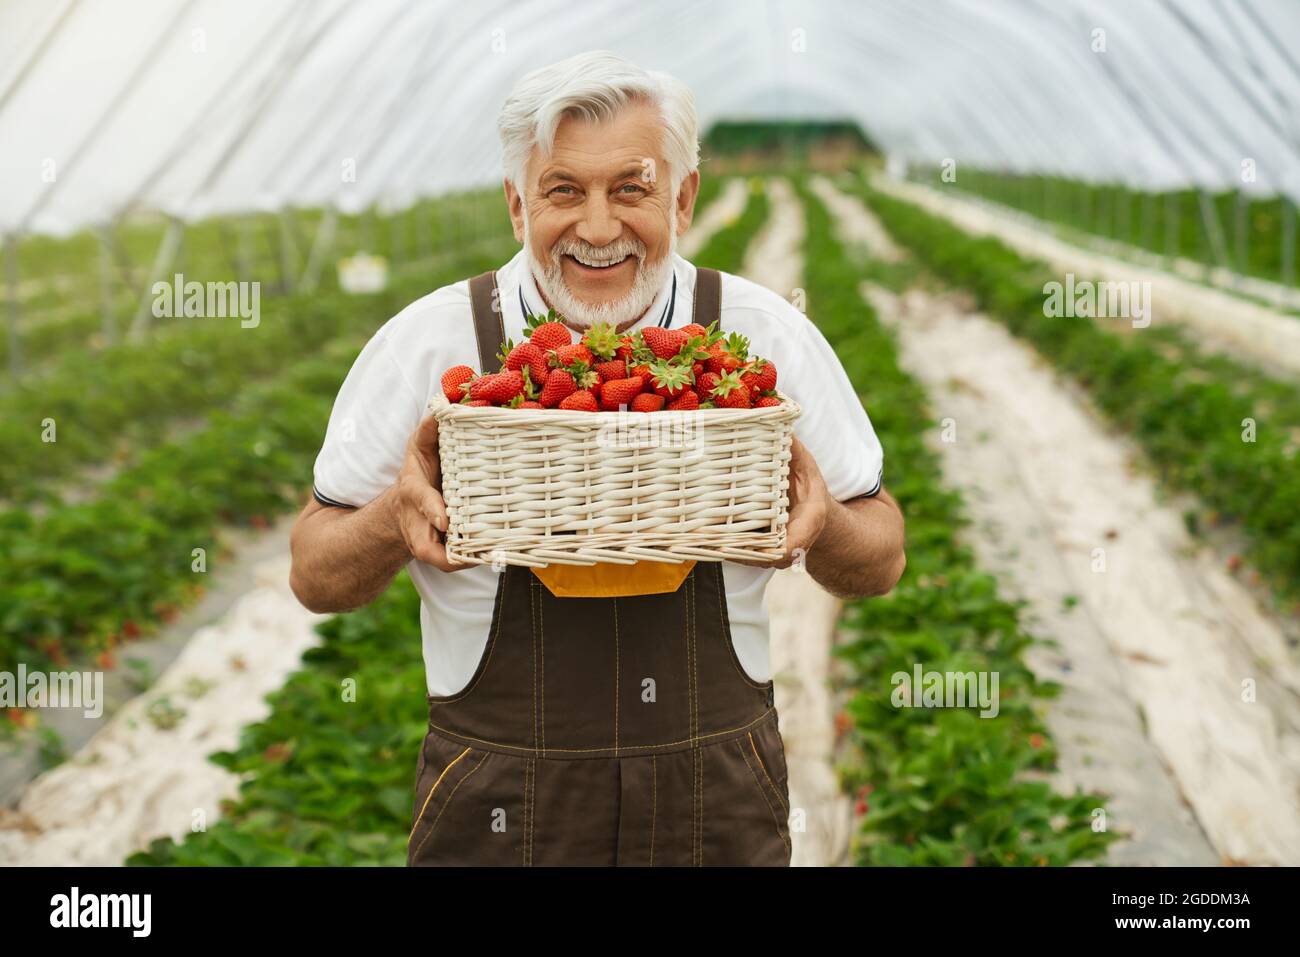 Front view of happy farmer in work clothes enjoying with red and fresh strawberries in nice wicker basket. Concept of process filling basket with ripe strawberries. Stock Photo